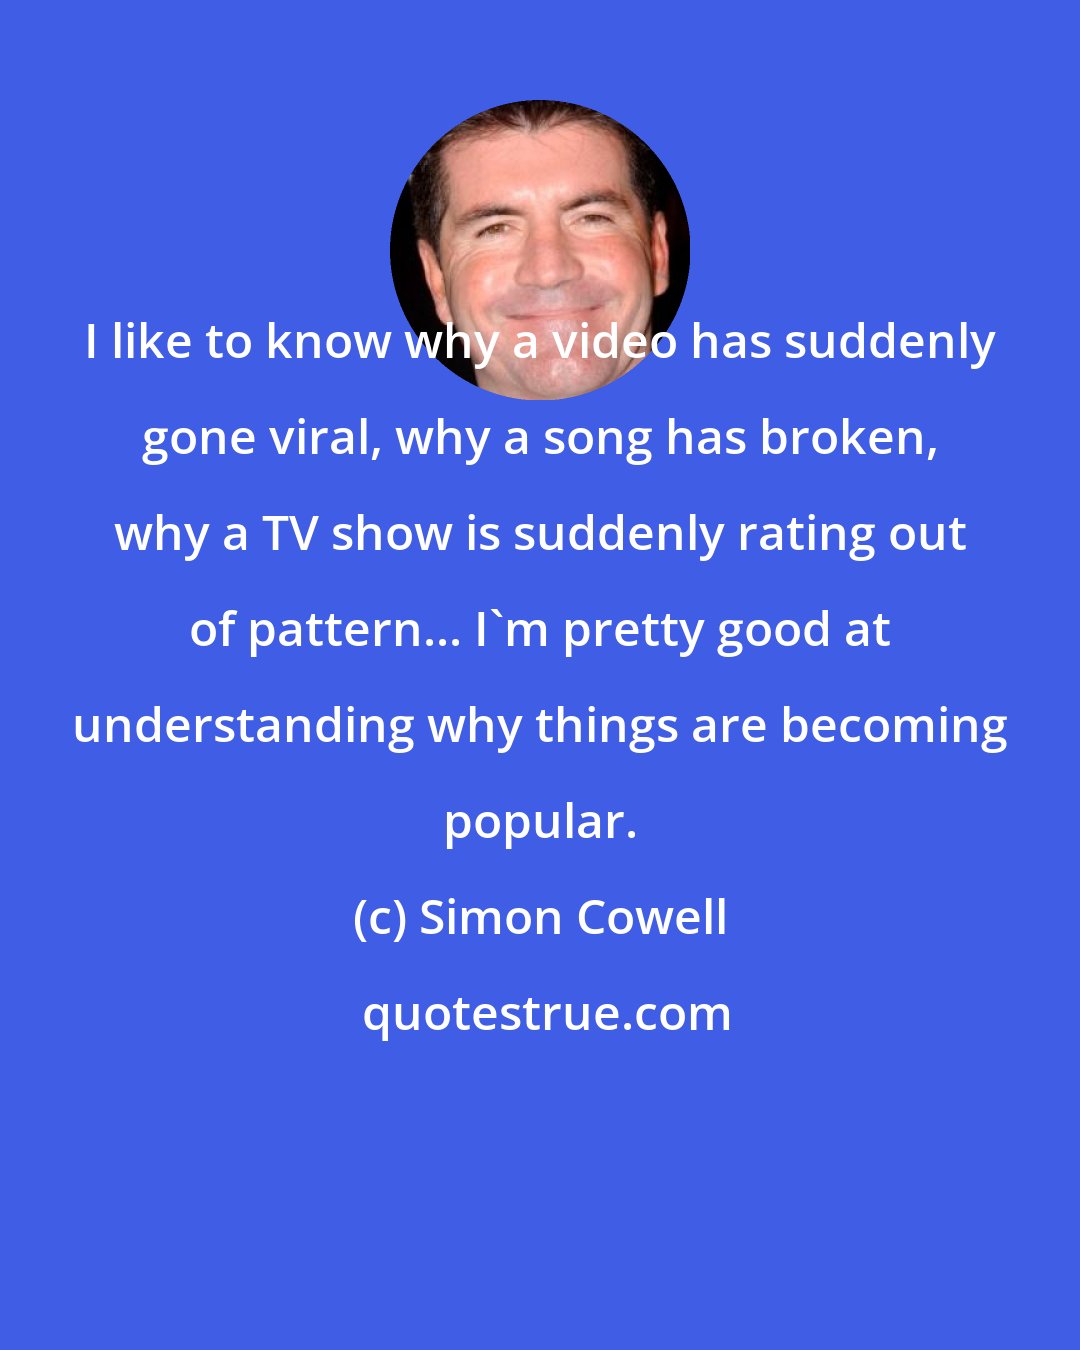 Simon Cowell: I like to know why a video has suddenly gone viral, why a song has broken, why a TV show is suddenly rating out of pattern... I'm pretty good at understanding why things are becoming popular.